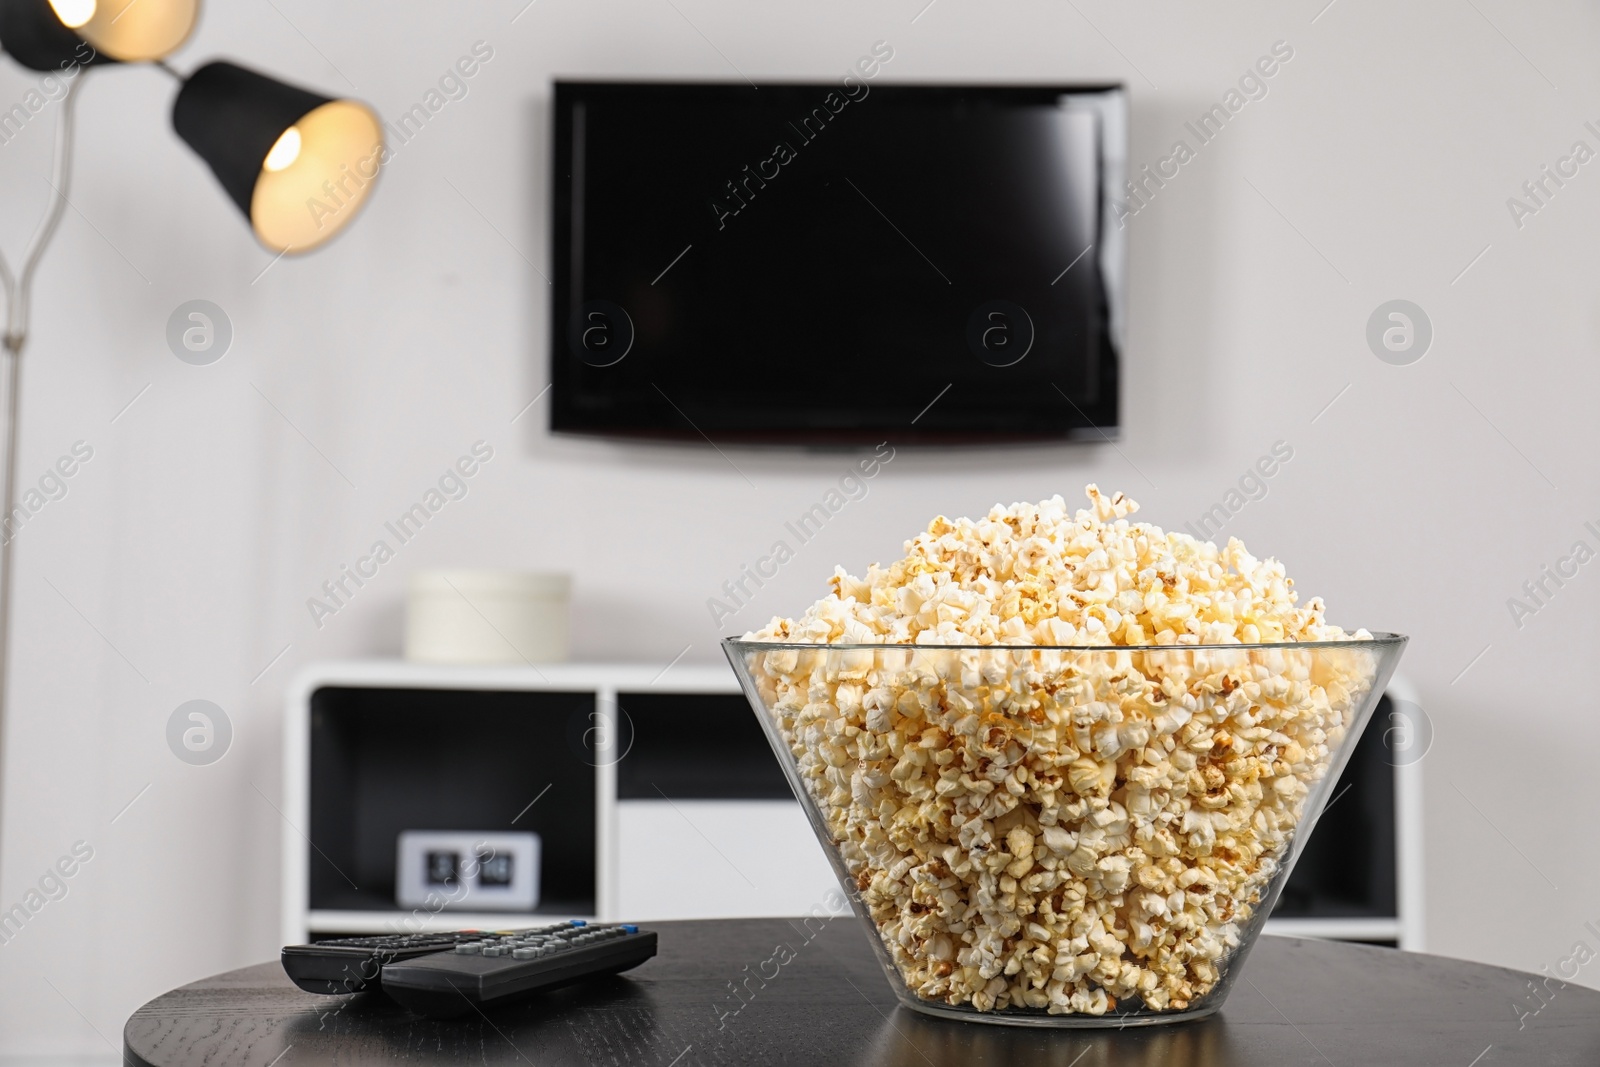 Photo of Popcorn and TV remote controls on table in living room